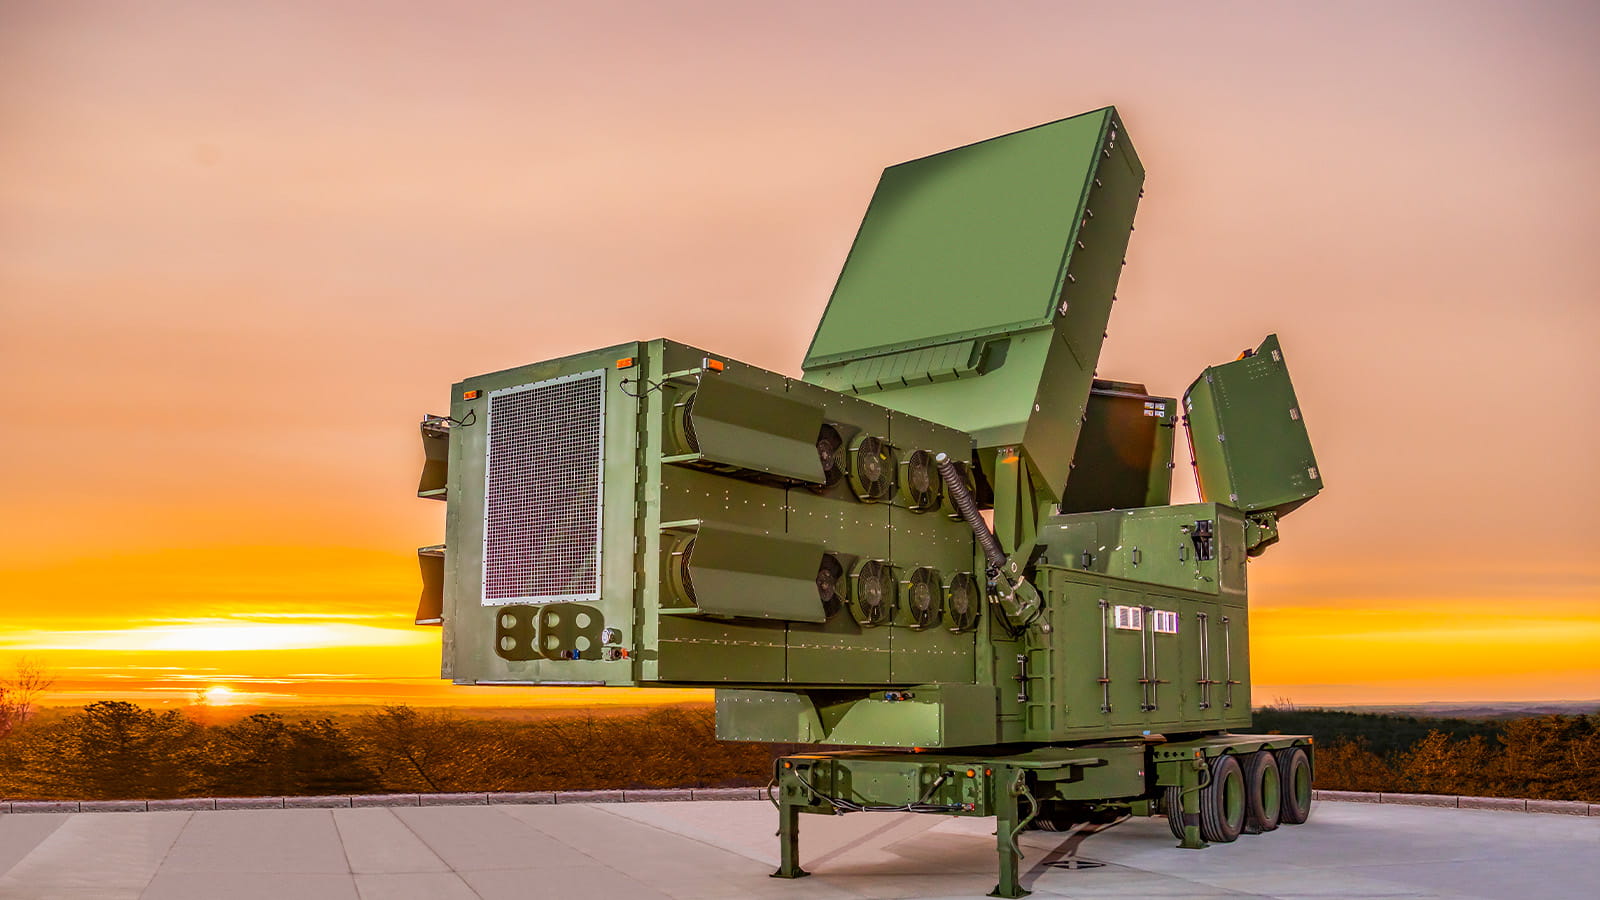 Lockheed Martin successfully integrated the LTAMDS radar into the MIM-104 Patriot missile defence system with PAC-3 interceptors for the first time